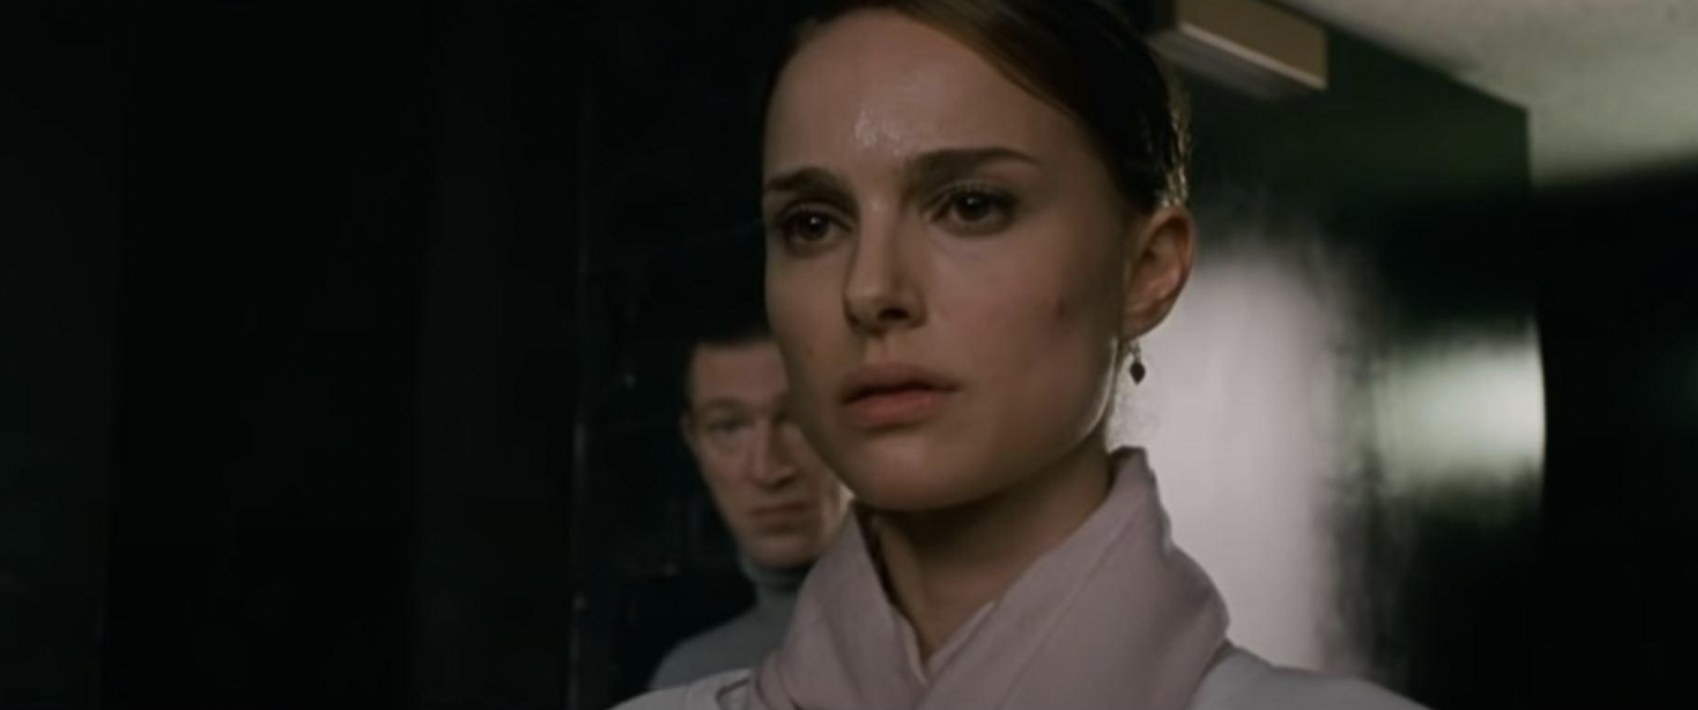 A moment from the Black Swan scene in question